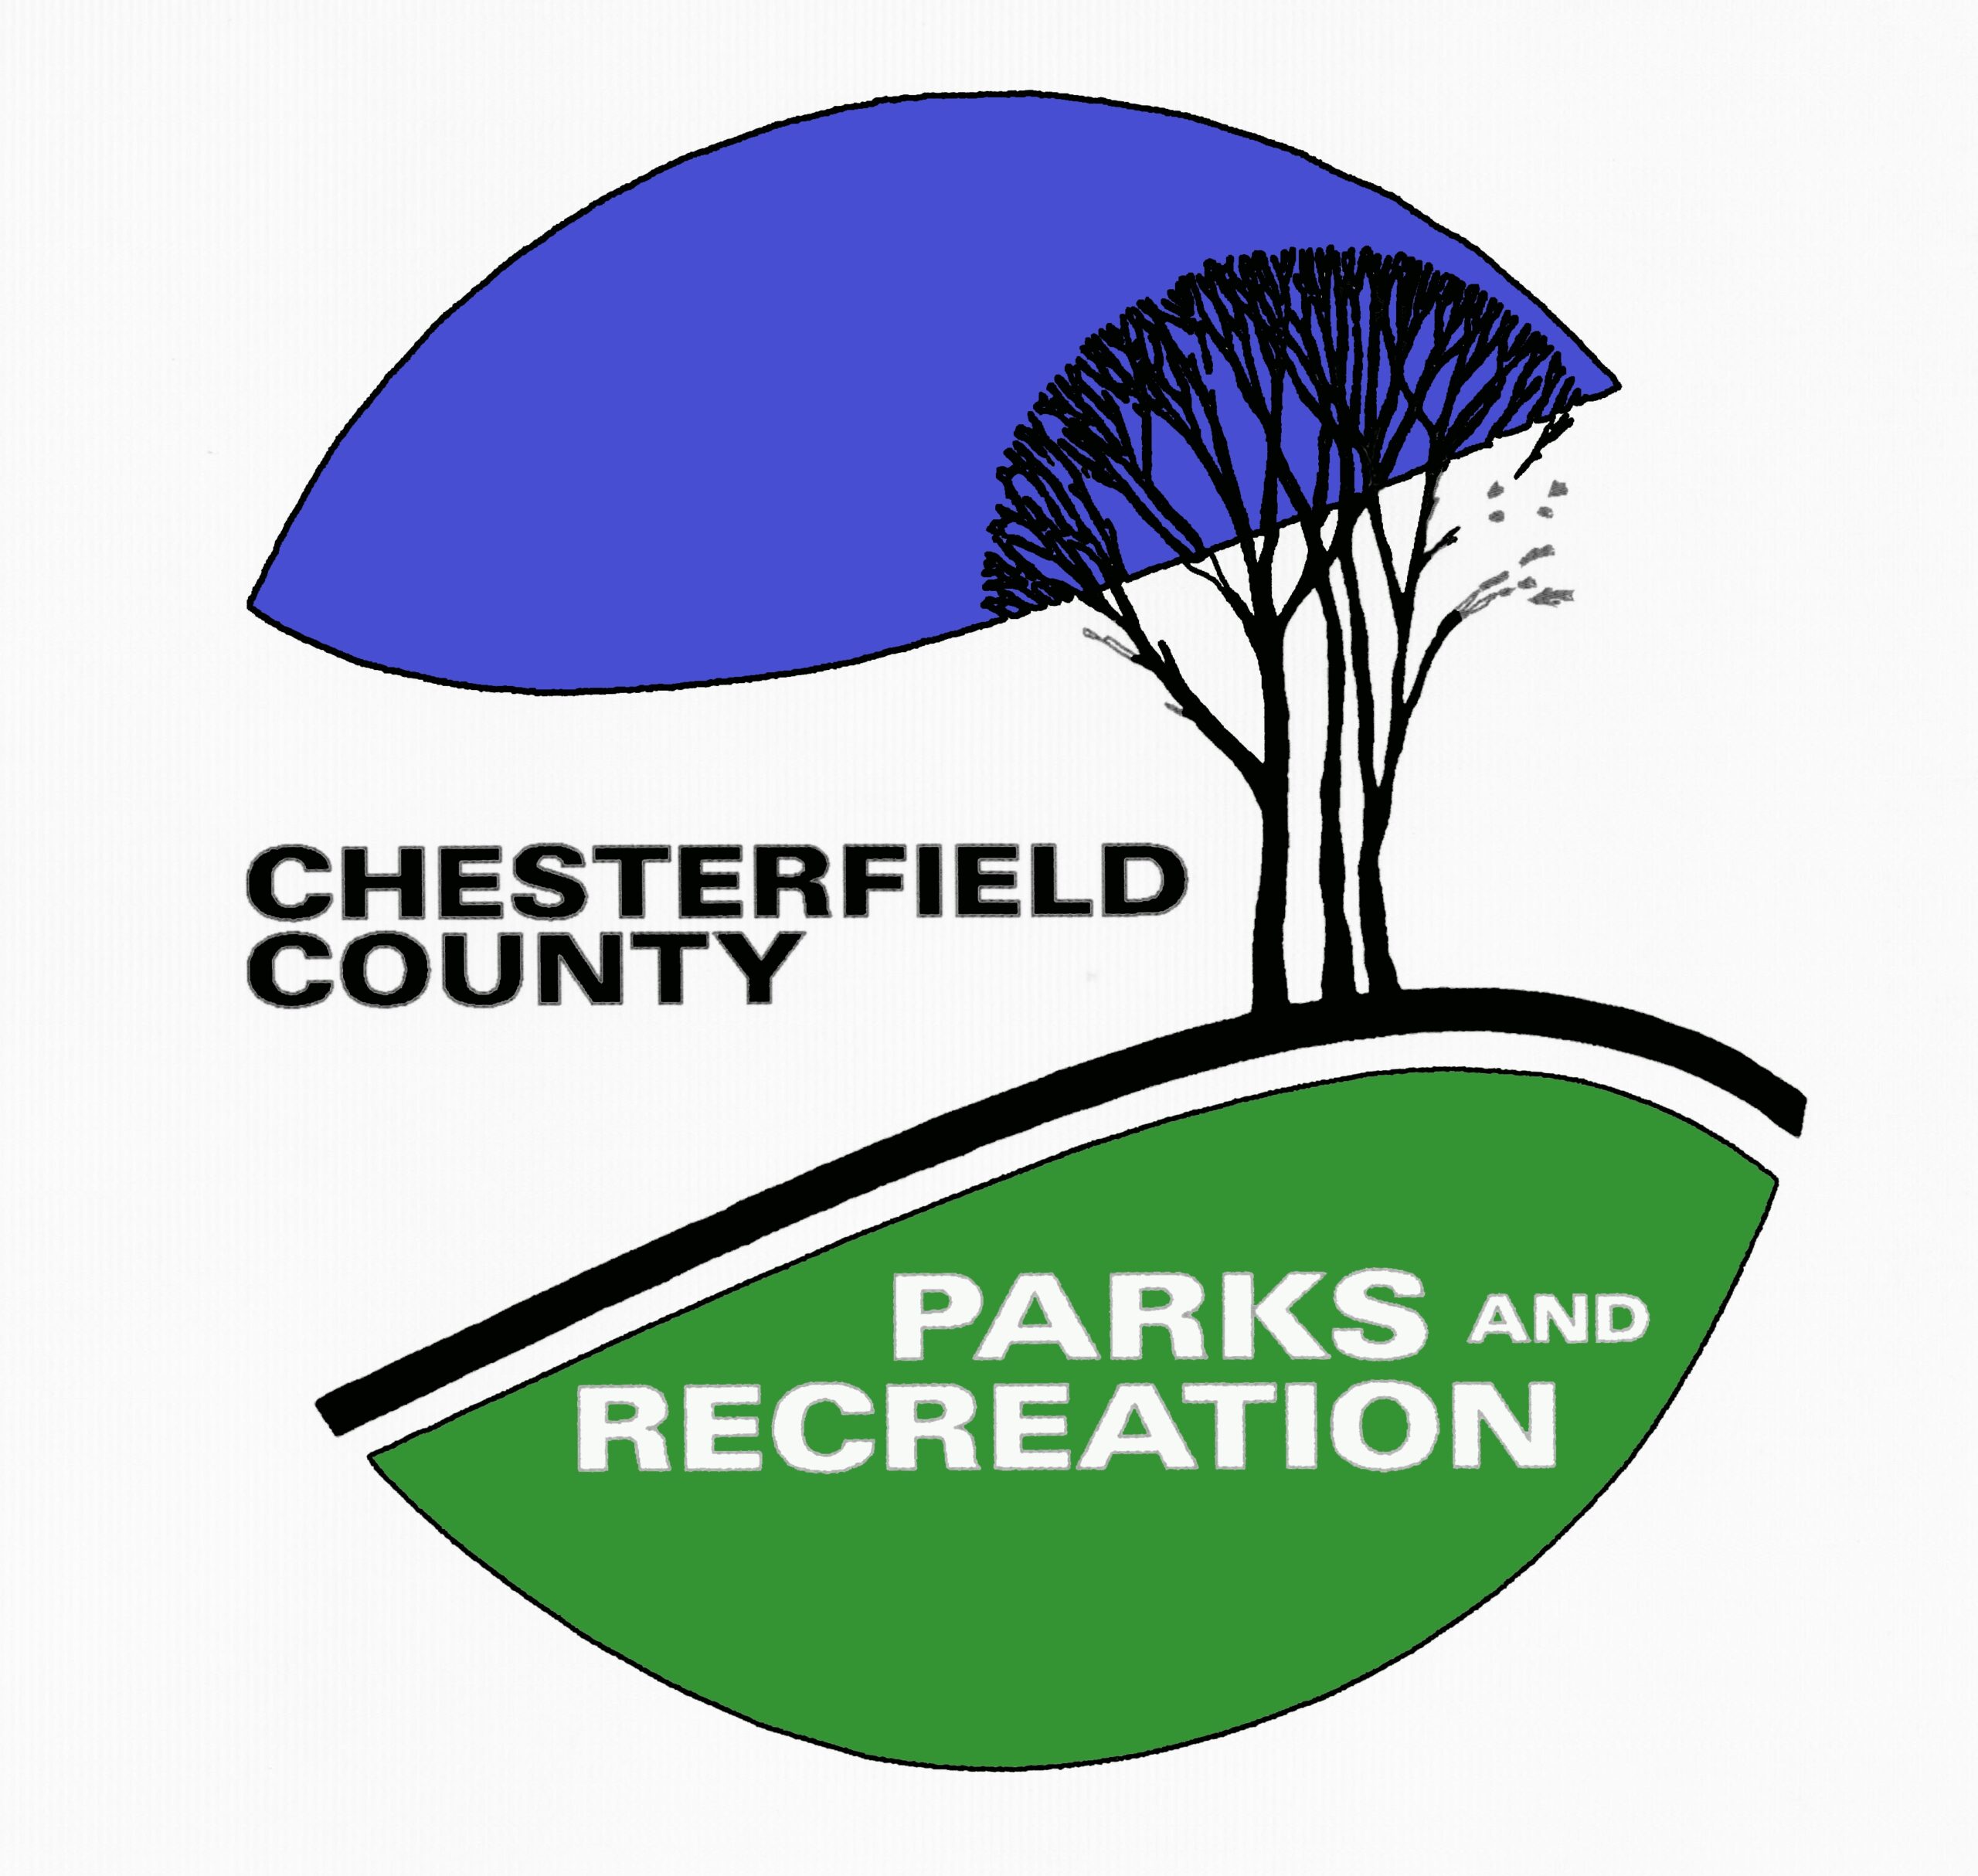 Chesterfield County Parks & Recreation